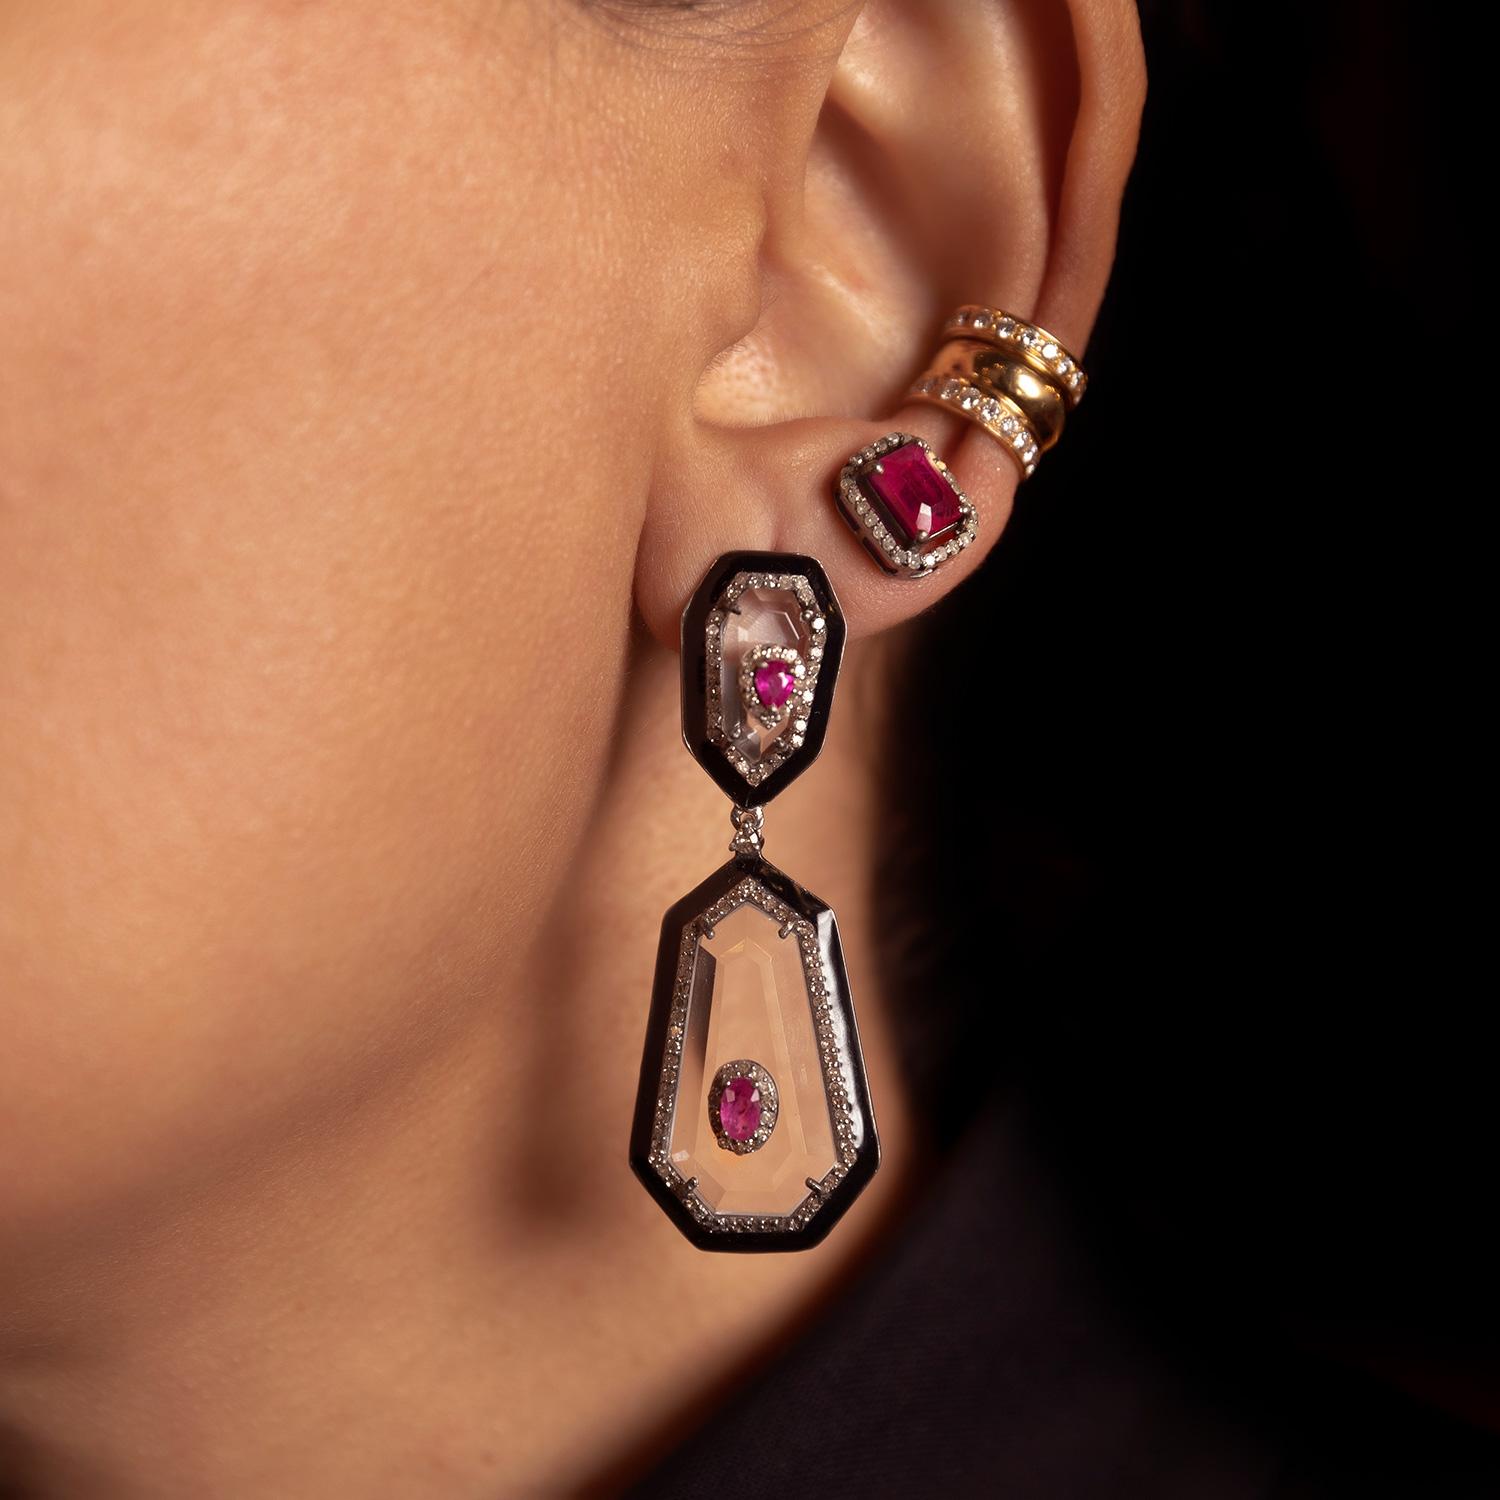 Featuring 0.78 carat of natural consciously sourced rubies,1.49 carat of small single cut diamonds & 17 carat of Mother of Pearl, detailed with black enamel borders.

Set on 925 silver (8.56 grams) & 14kt gold (0.93 grams).

4.7 cm in full